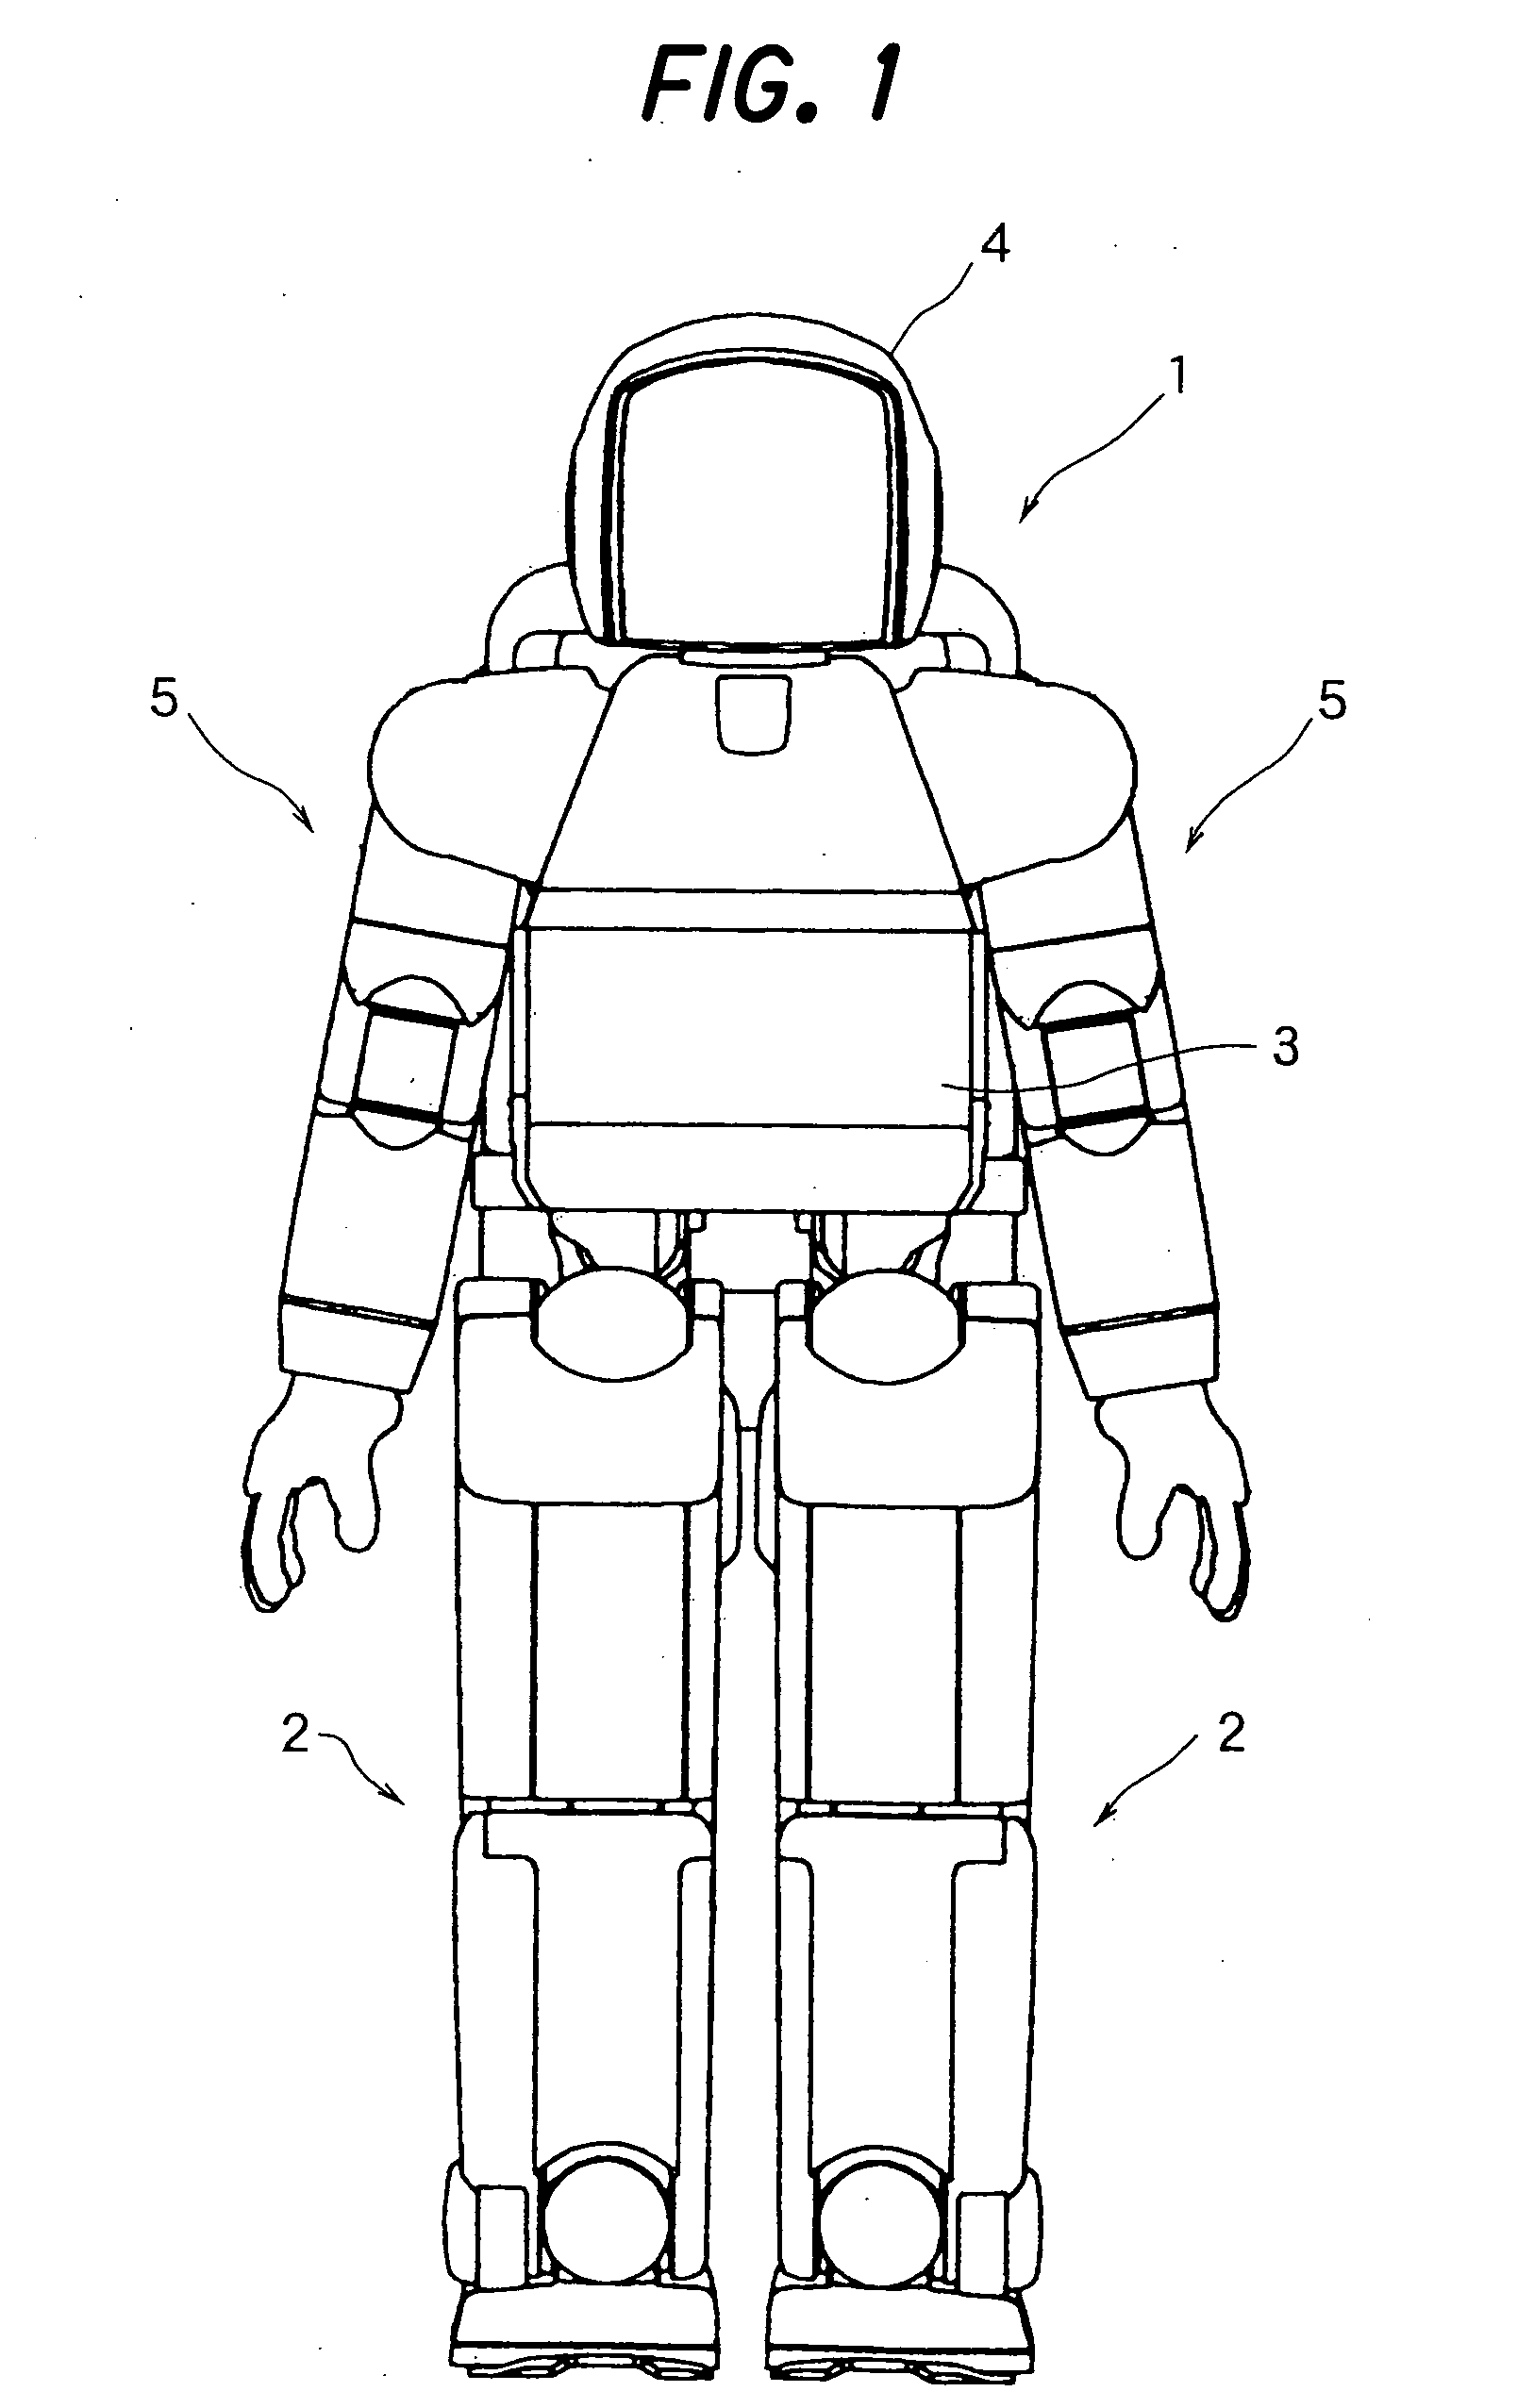 Abnormality detector of moving robot